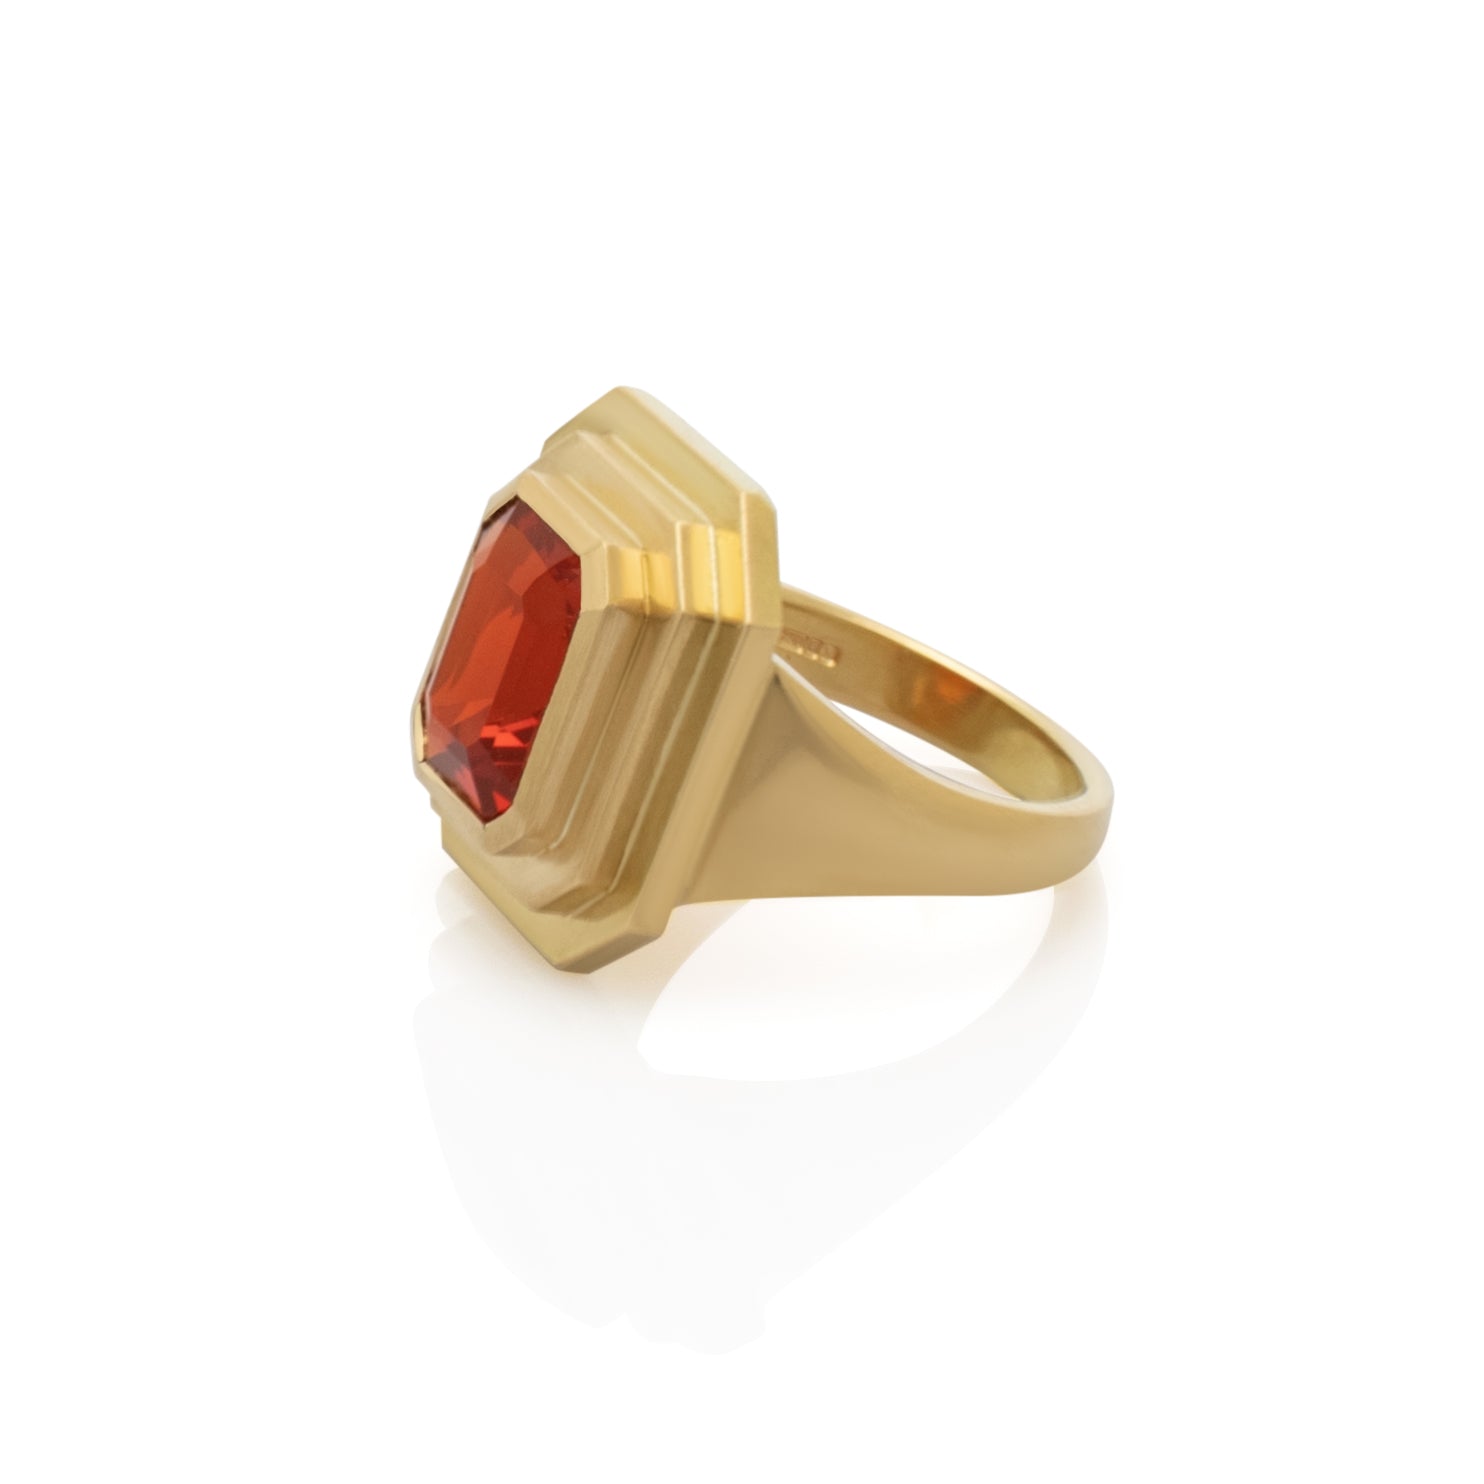 Fire Opal ring. Step Ring. Fire opal cocktail ring. Red Gemstone ring. Fire gemstone ring. Red gemstone jewellery. Fire opal jewellery. 18 carat gold ring. Handmade ring. Fine jewellery. Serena Ansell jewellery. London jeweller. 